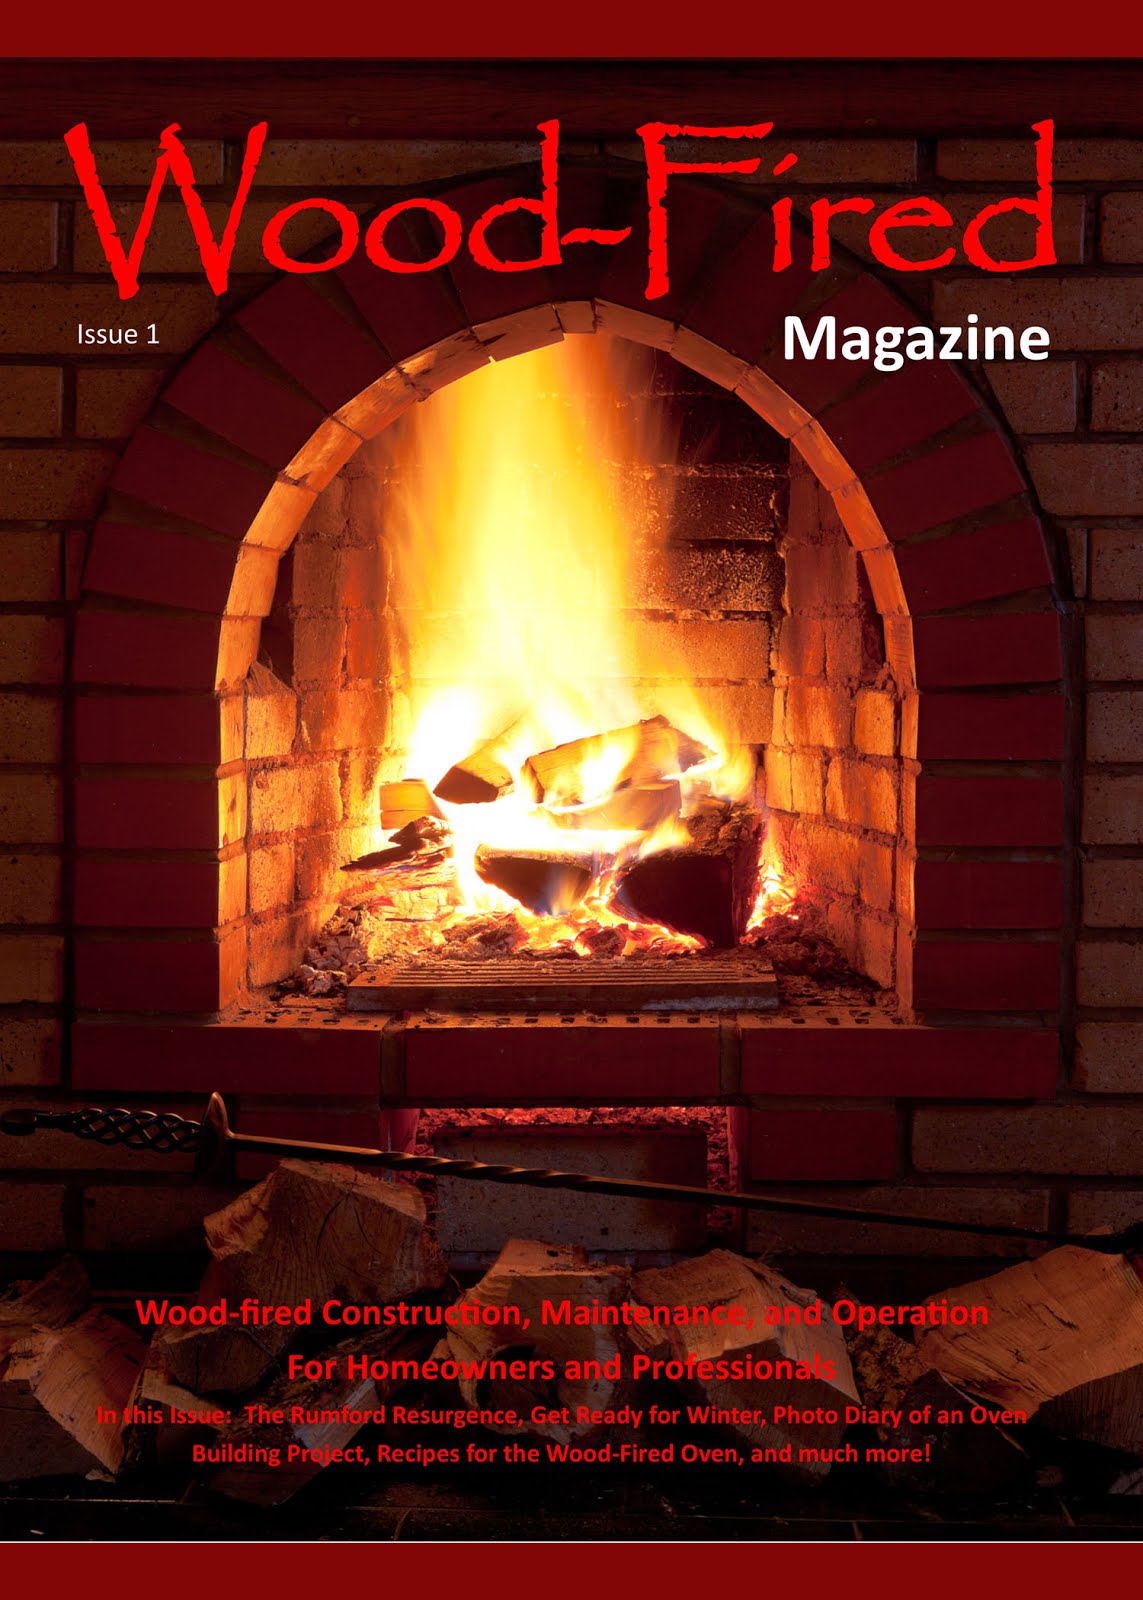 Wood-Fired image